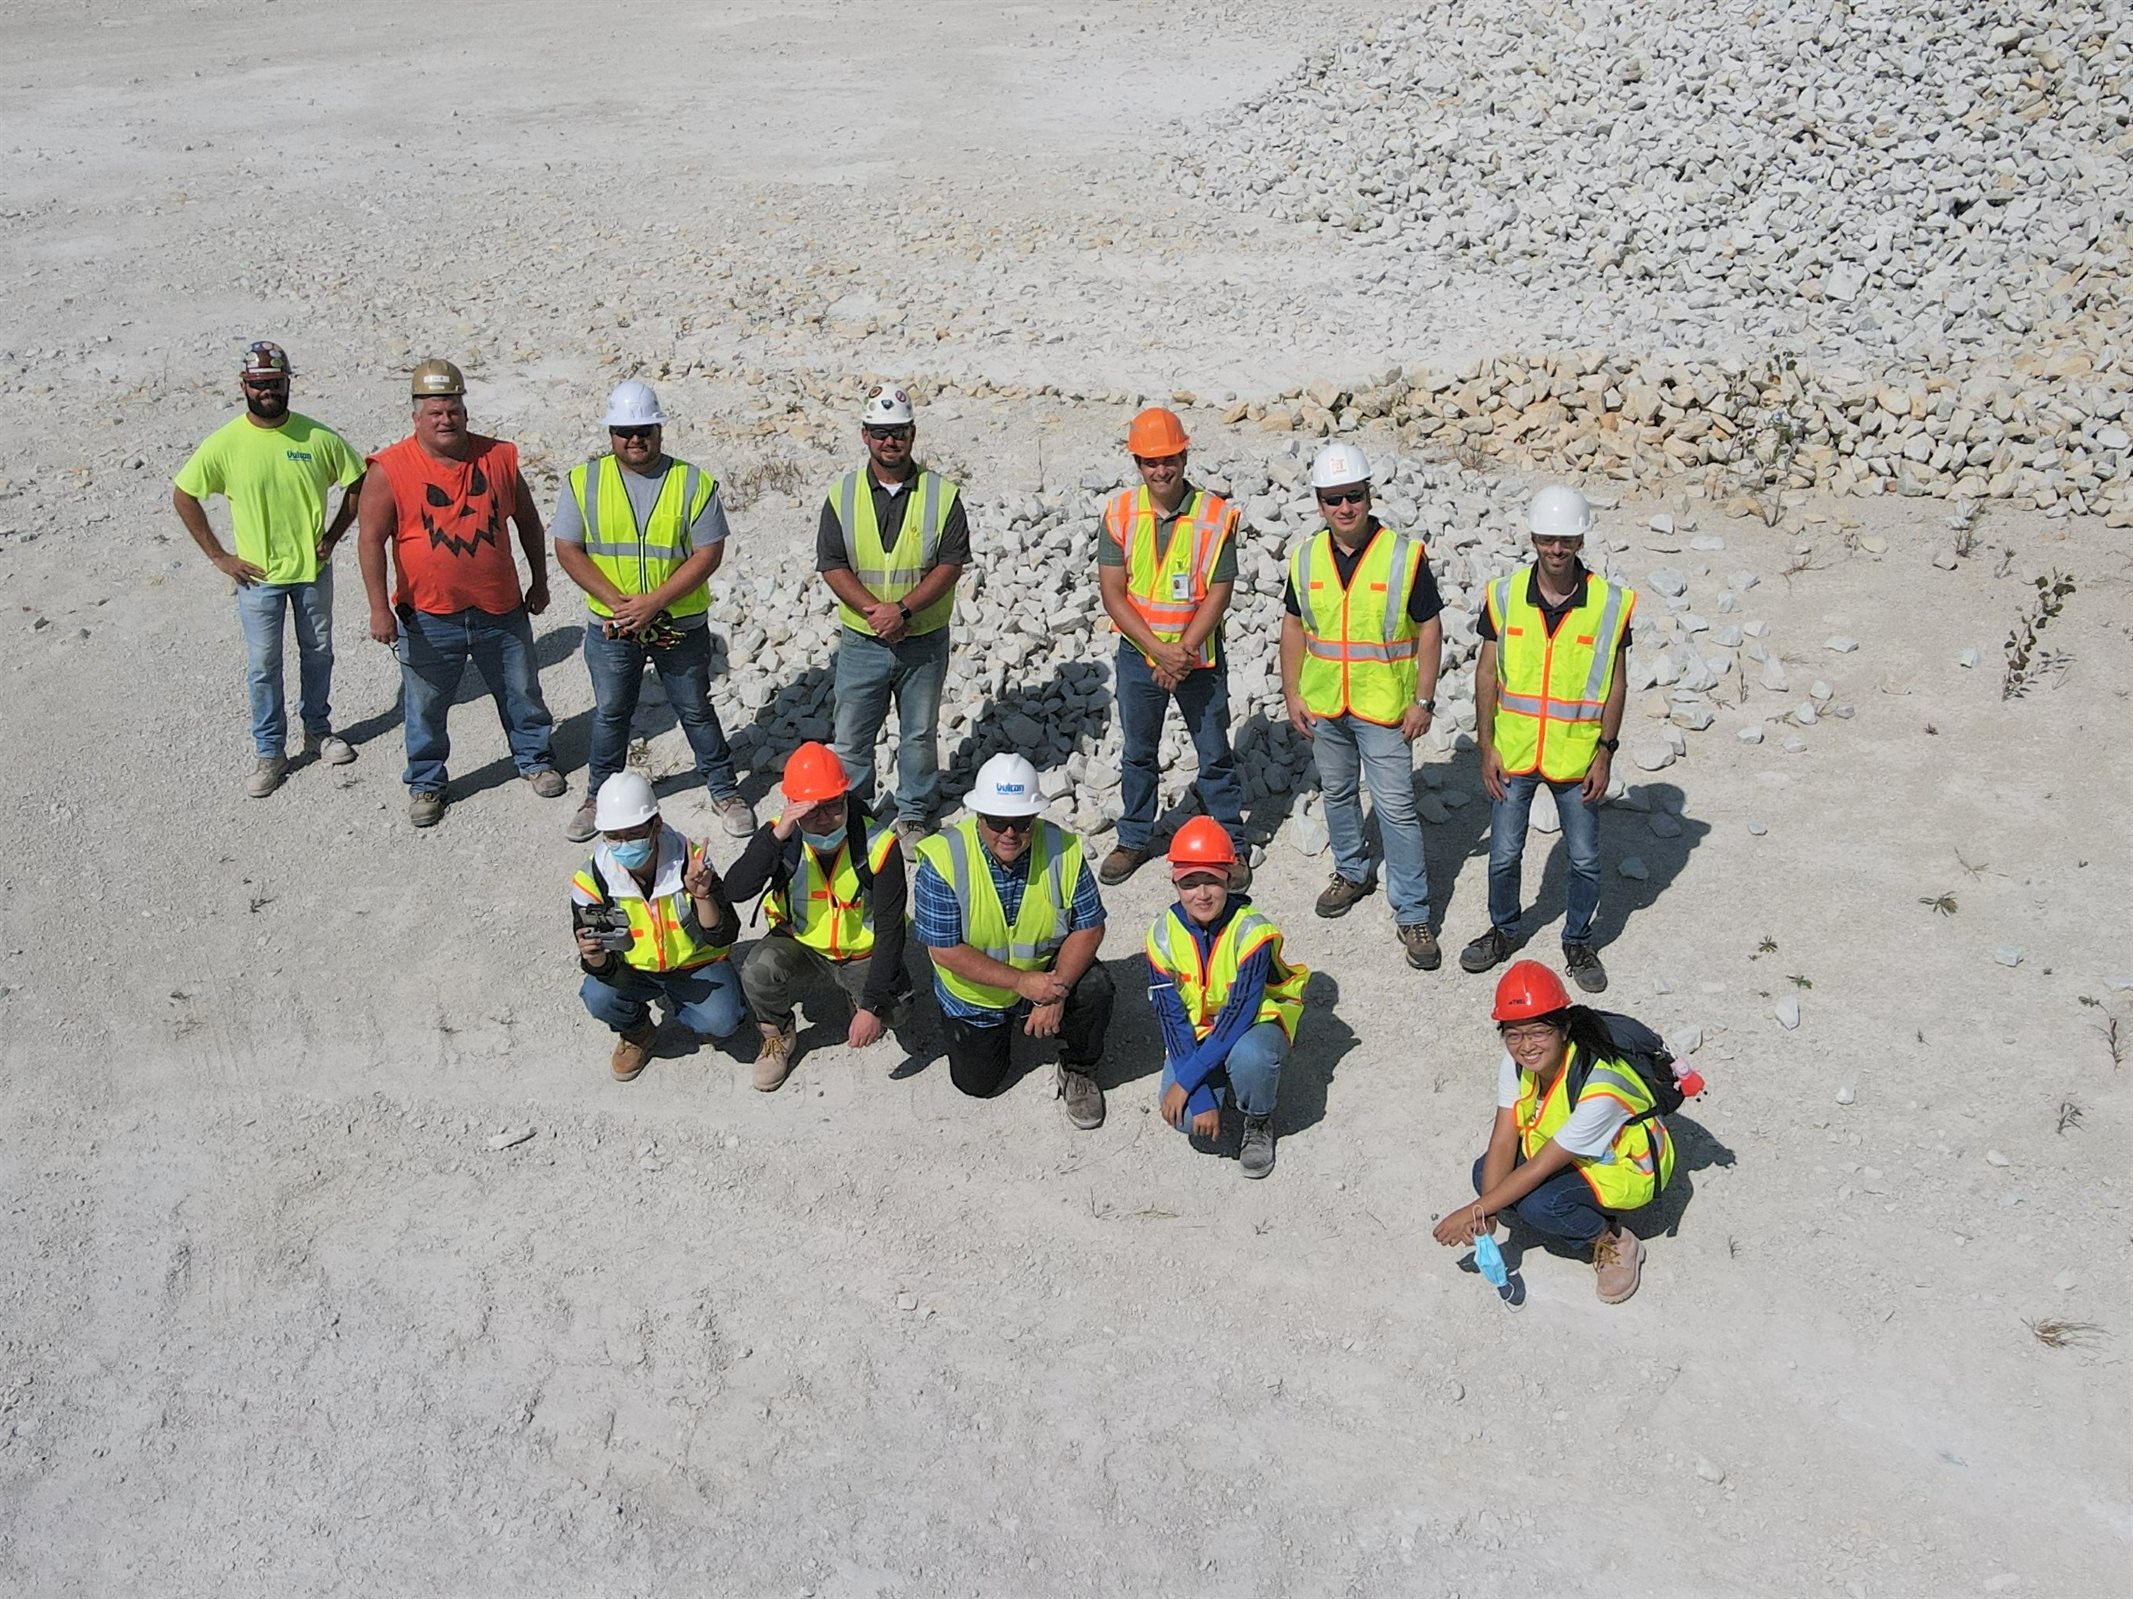 Provided by&amp;nbsp;Erol Tutumluer. The researchers pose to a drone in front of a riprap stockpile at a visit to a quarry in Kankakee, Illinois.